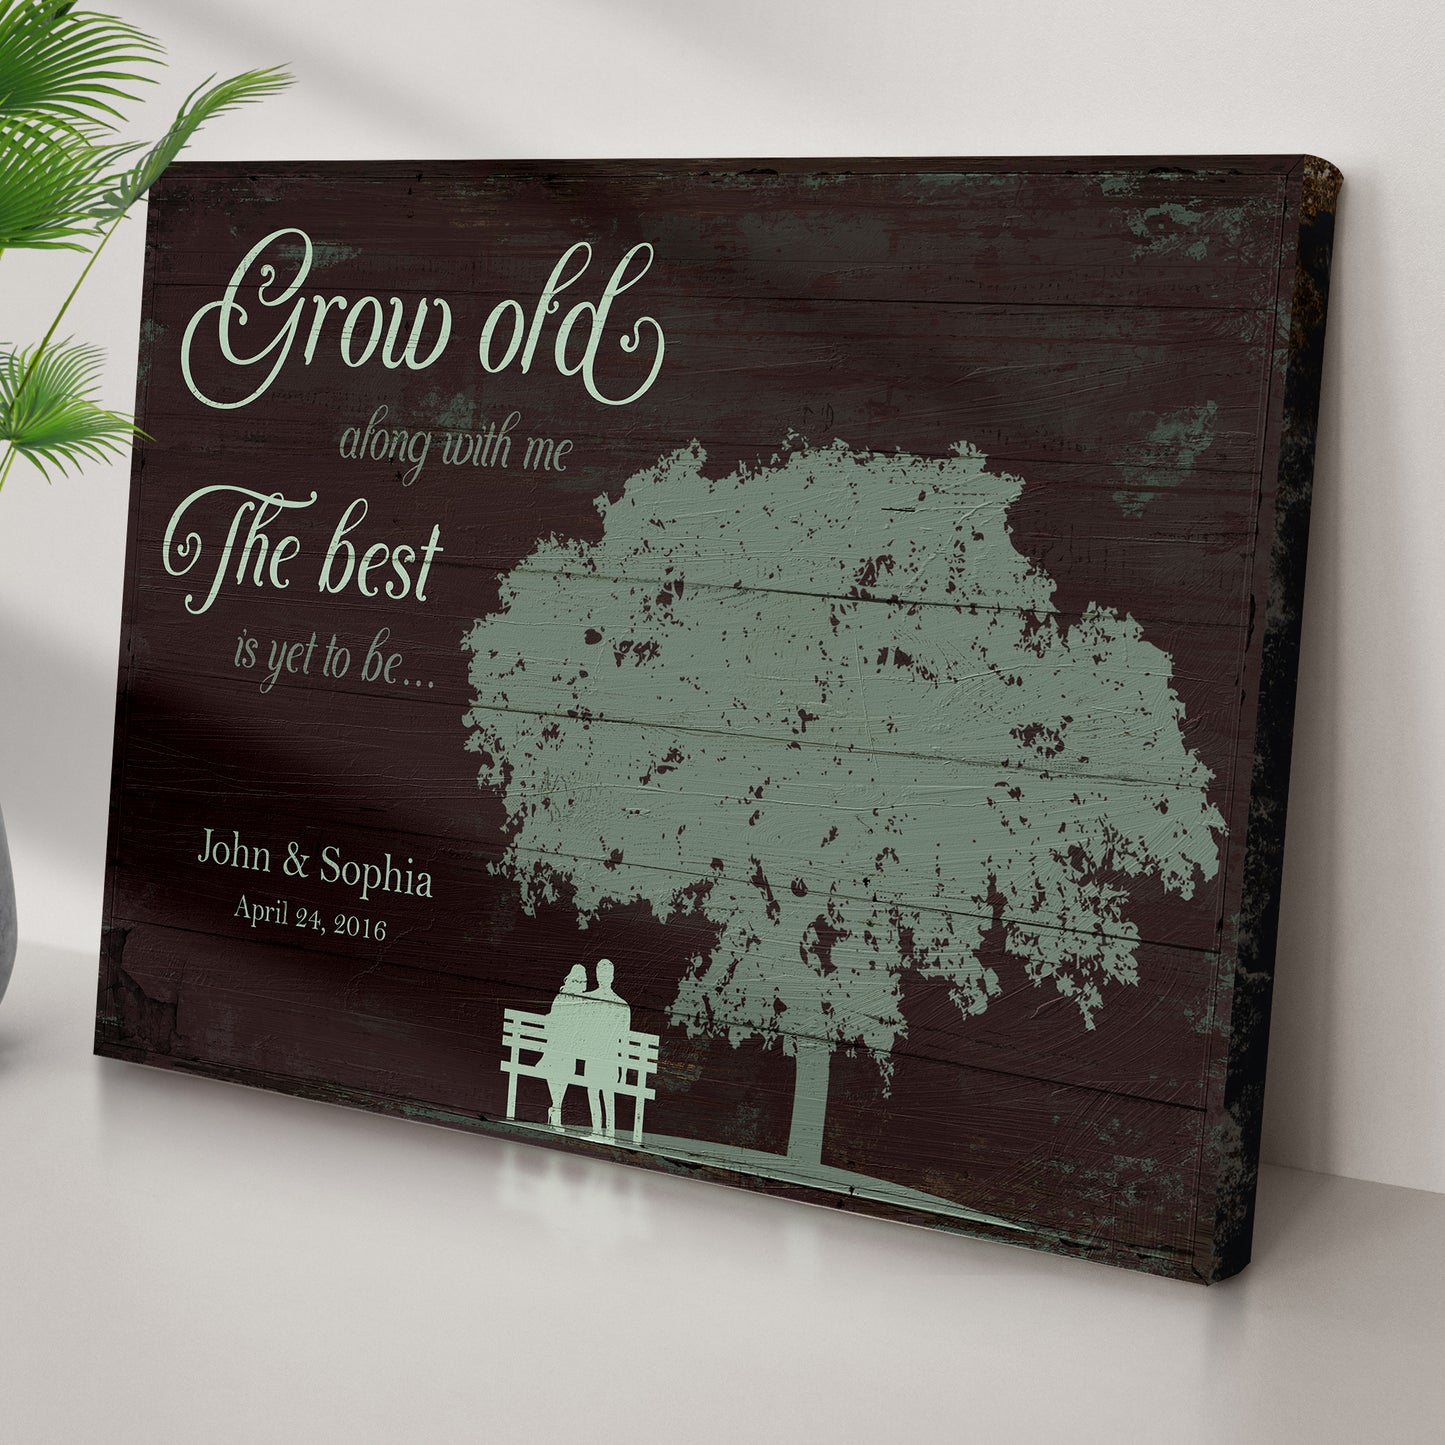 Grow Old Along With Me, The Best Is Yet To Be Sign Style 1 - Image by Tailored Canvases